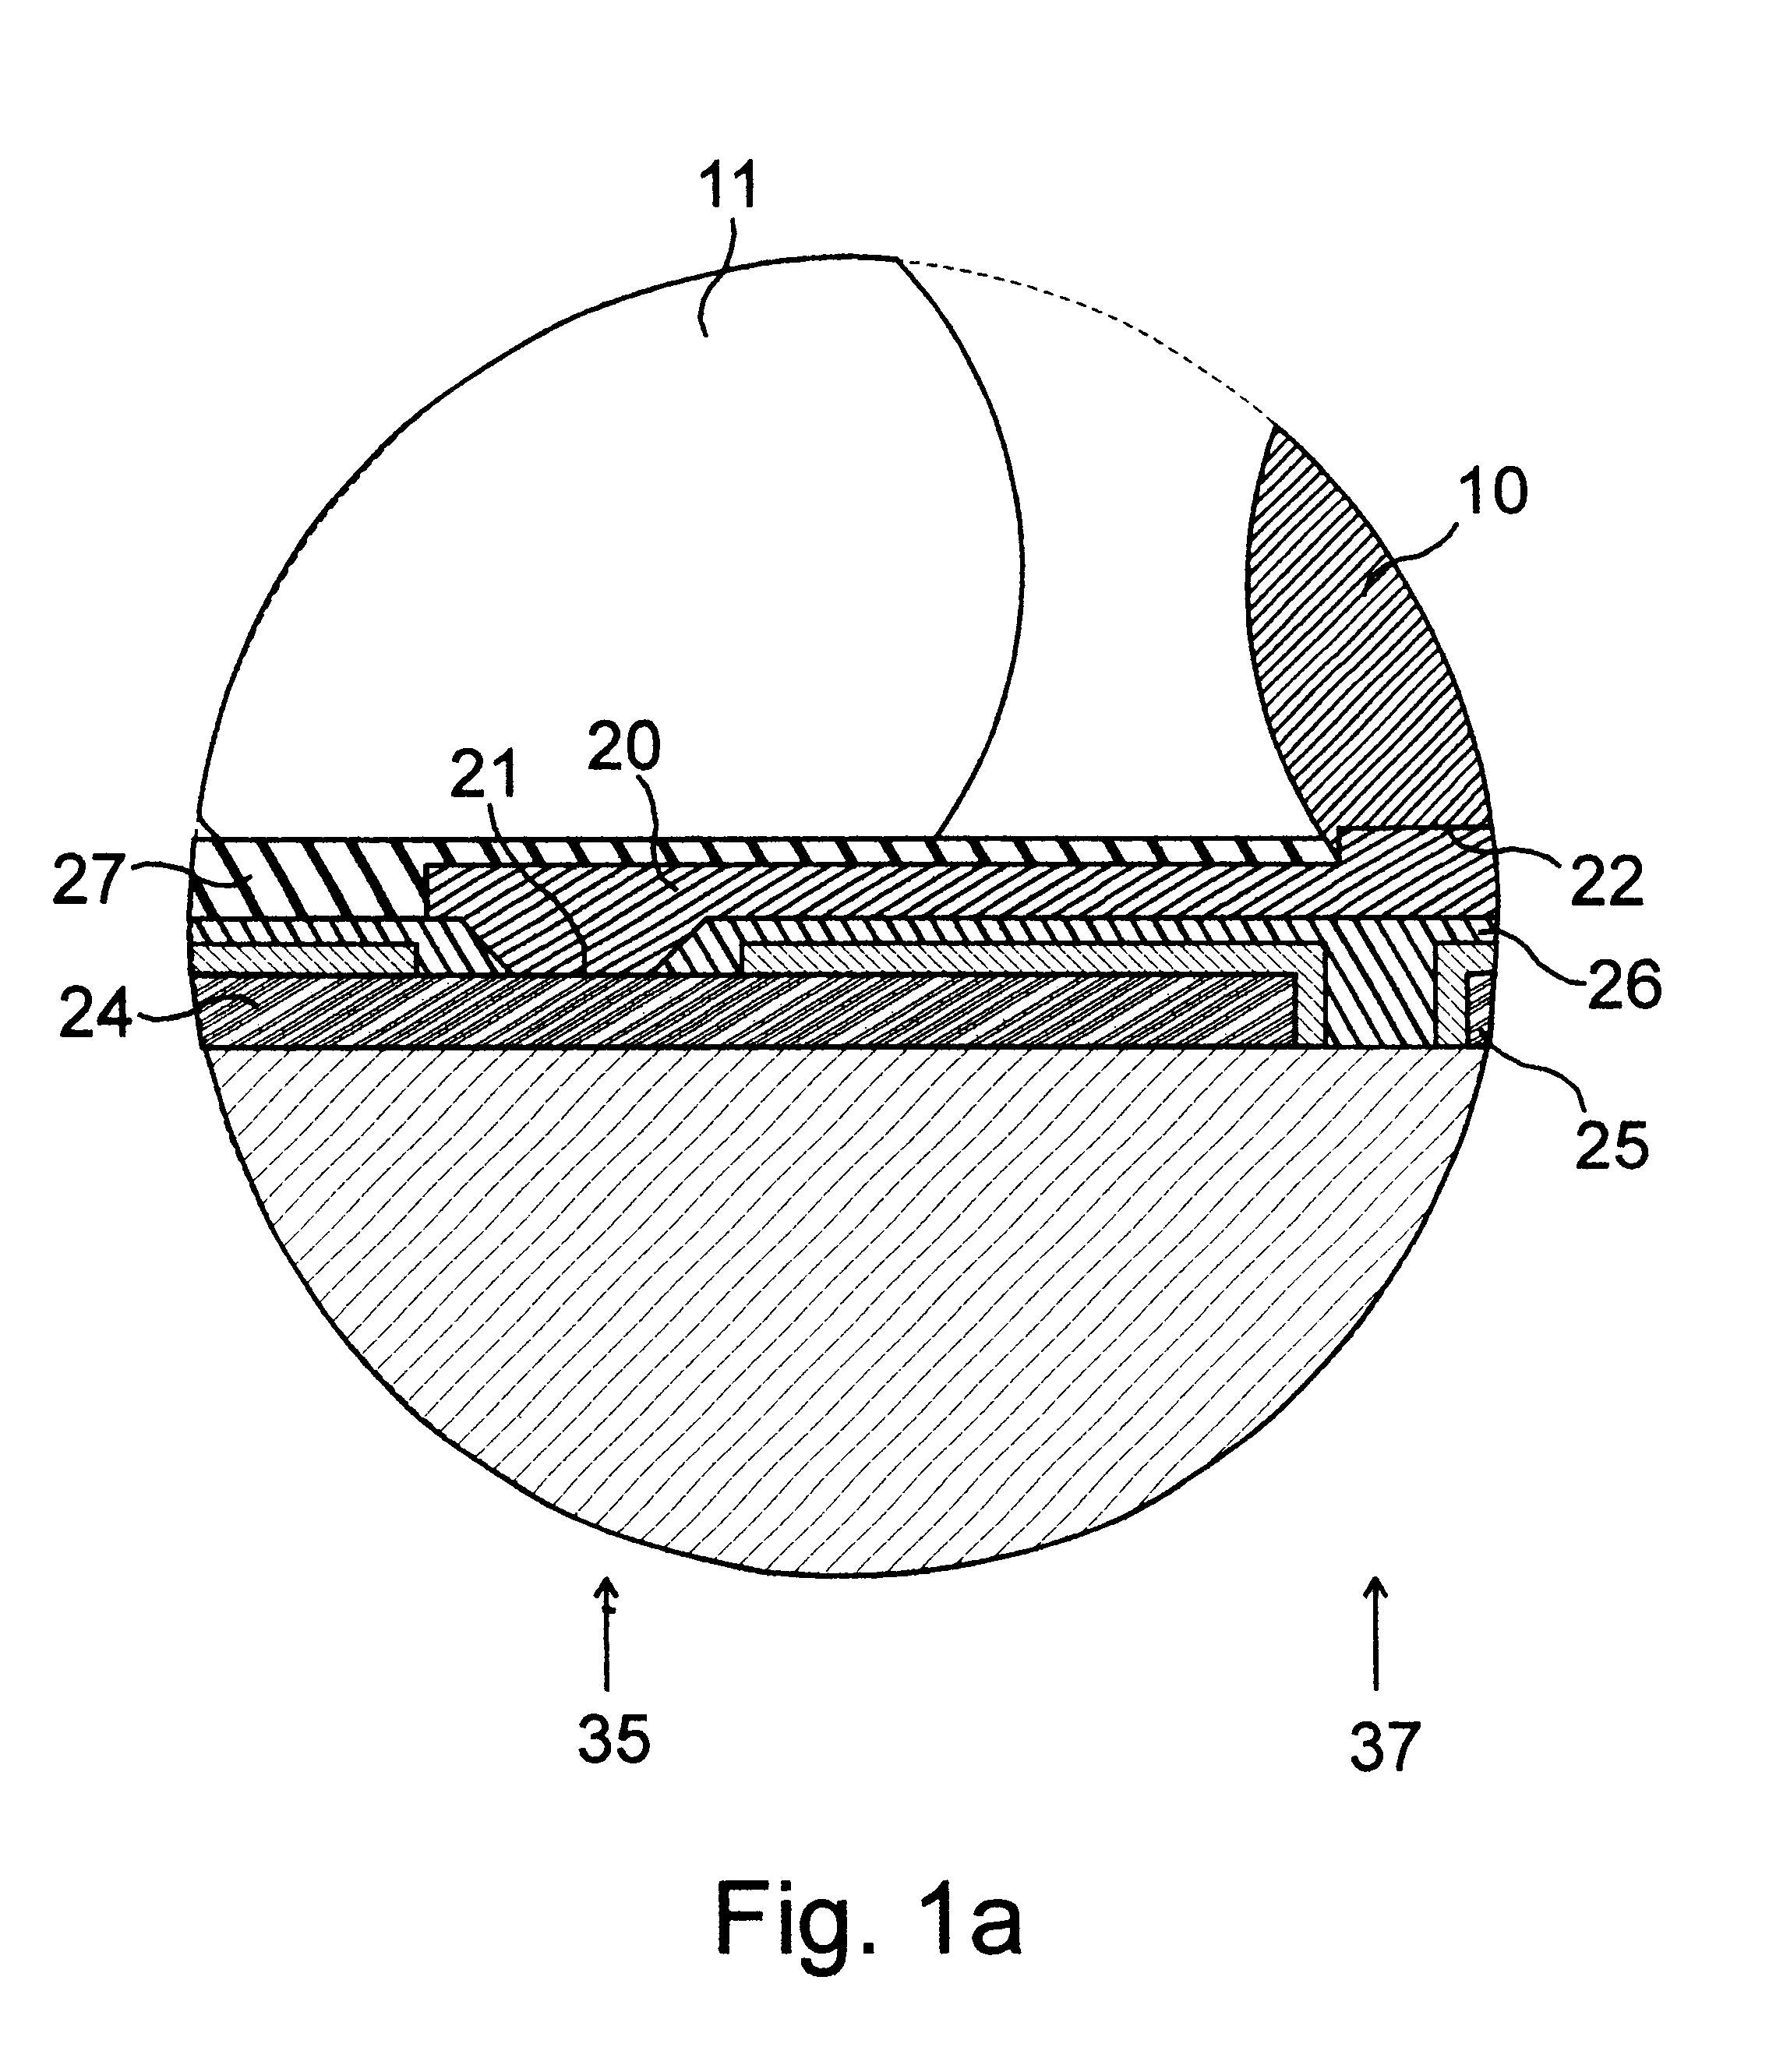 MOSFET device with multiple gate contacts offset from gate contact area and over source area